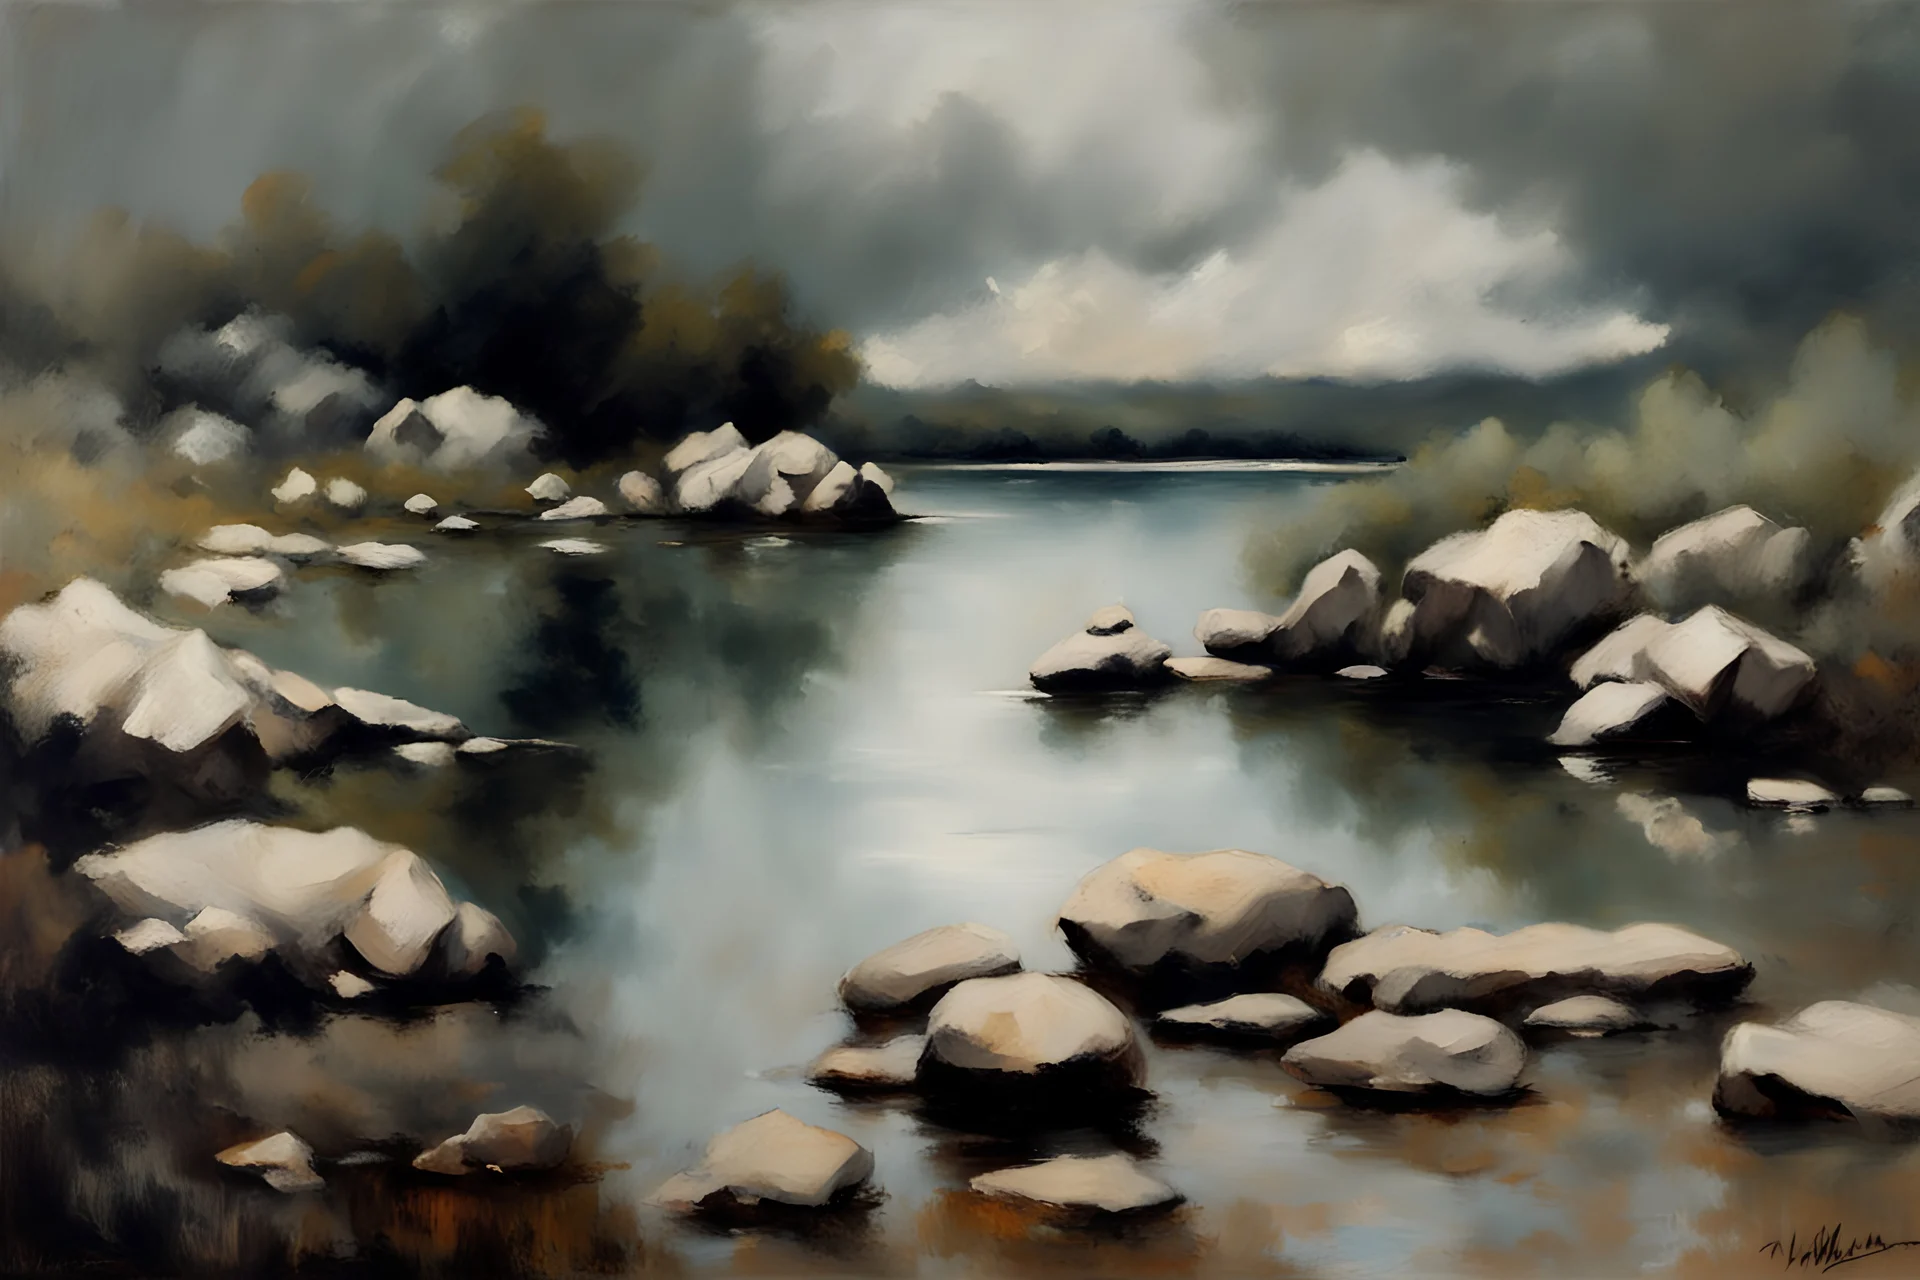 Cloudy day, lake, rocks, begginer's landscape, 2000's sci-fi movies influence, willem maris impressionism paintings